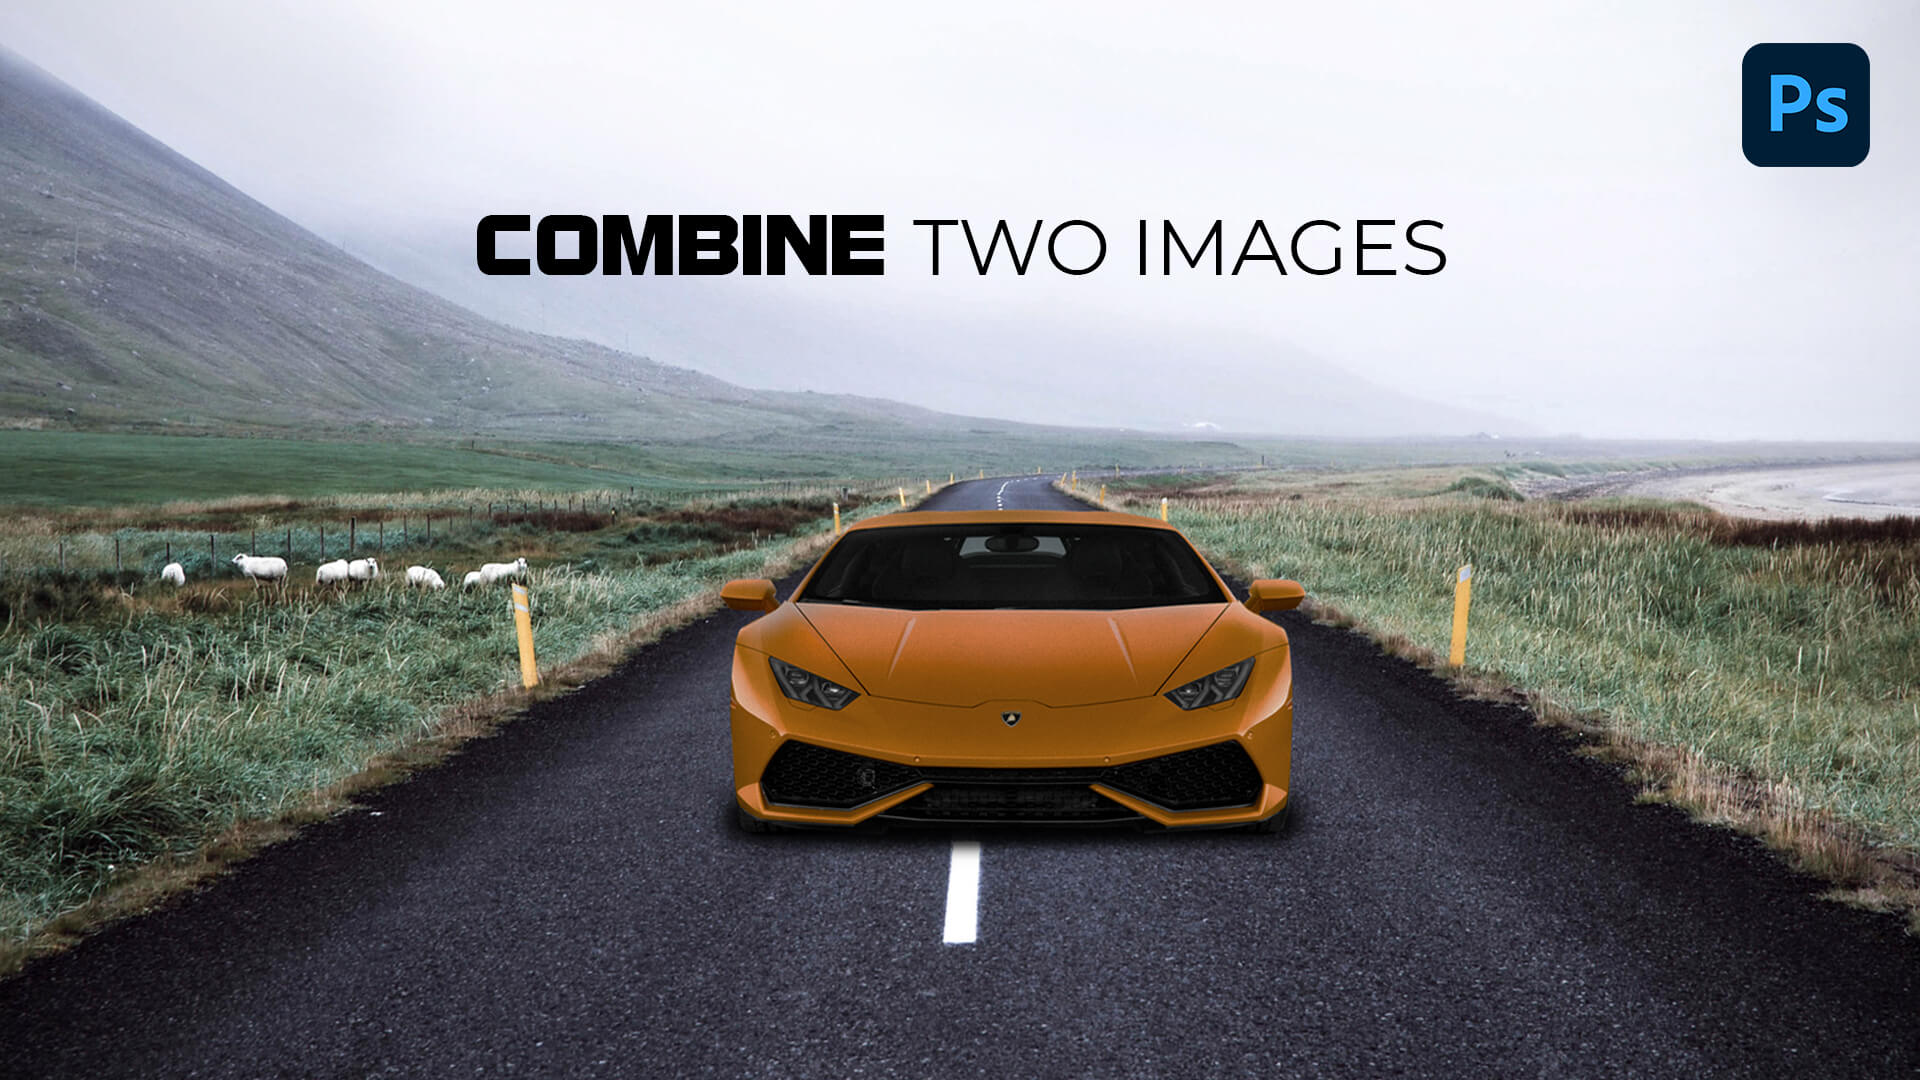 How to Combine Two Images in Photoshop